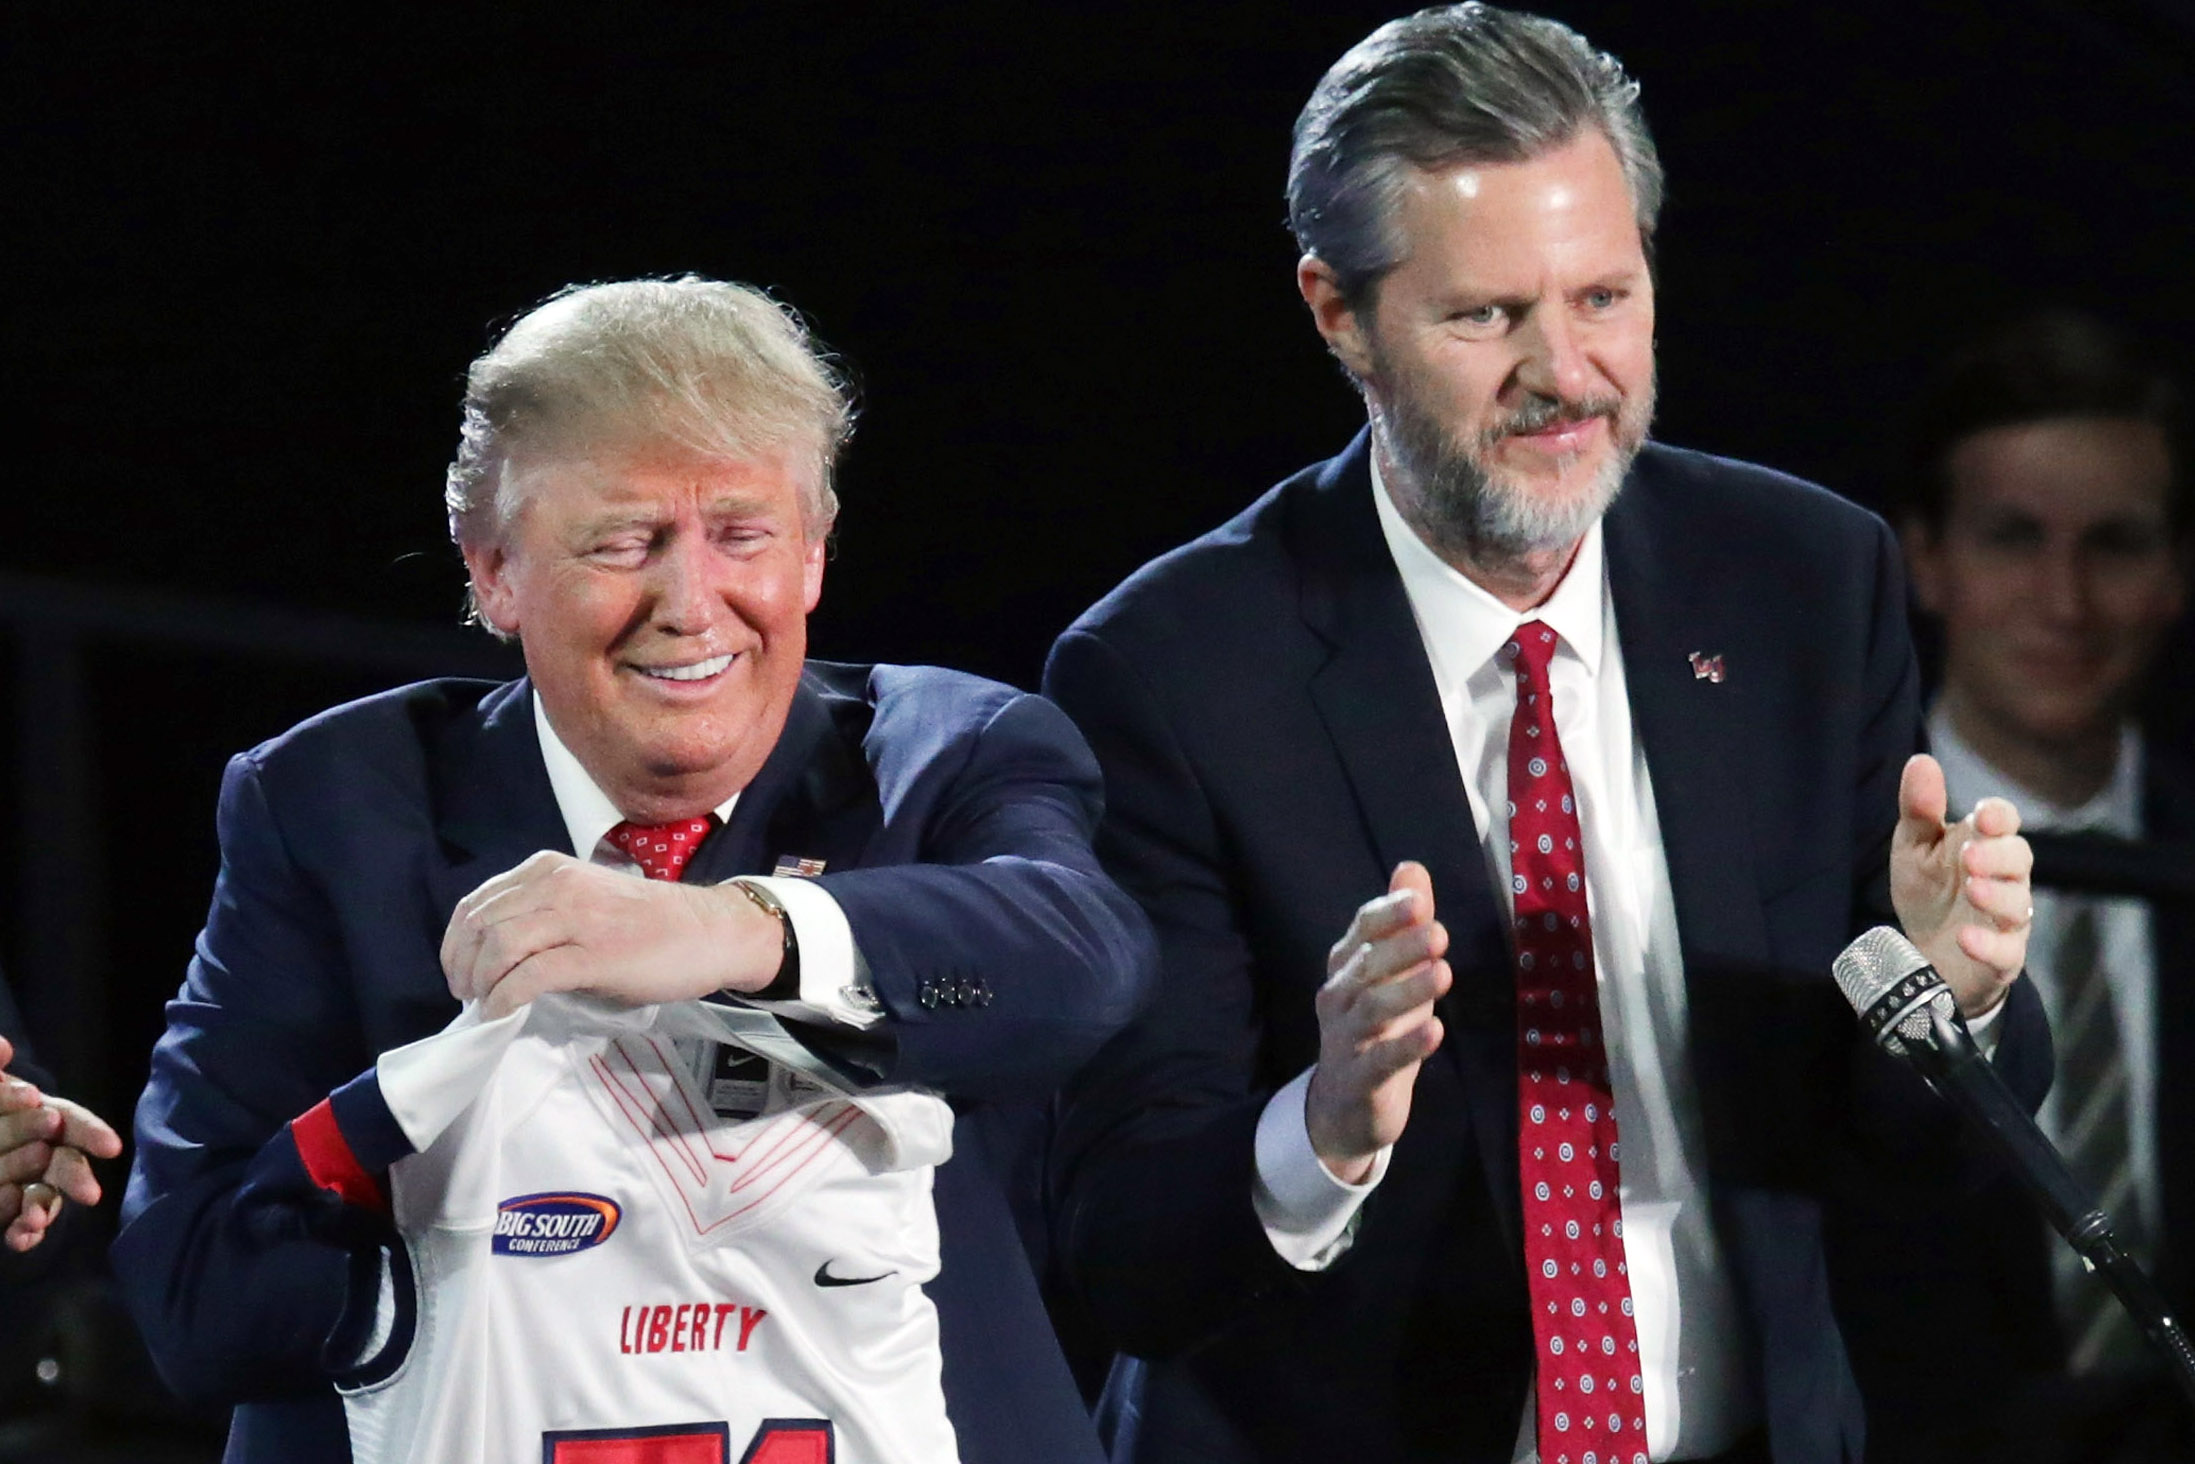 Jerry Falwell, Jr. presents Republican presidential candidate Donald Trump with a sports jersey after he delivered the convocation on Jan. 18, 2016 in Lynchburg, Va.